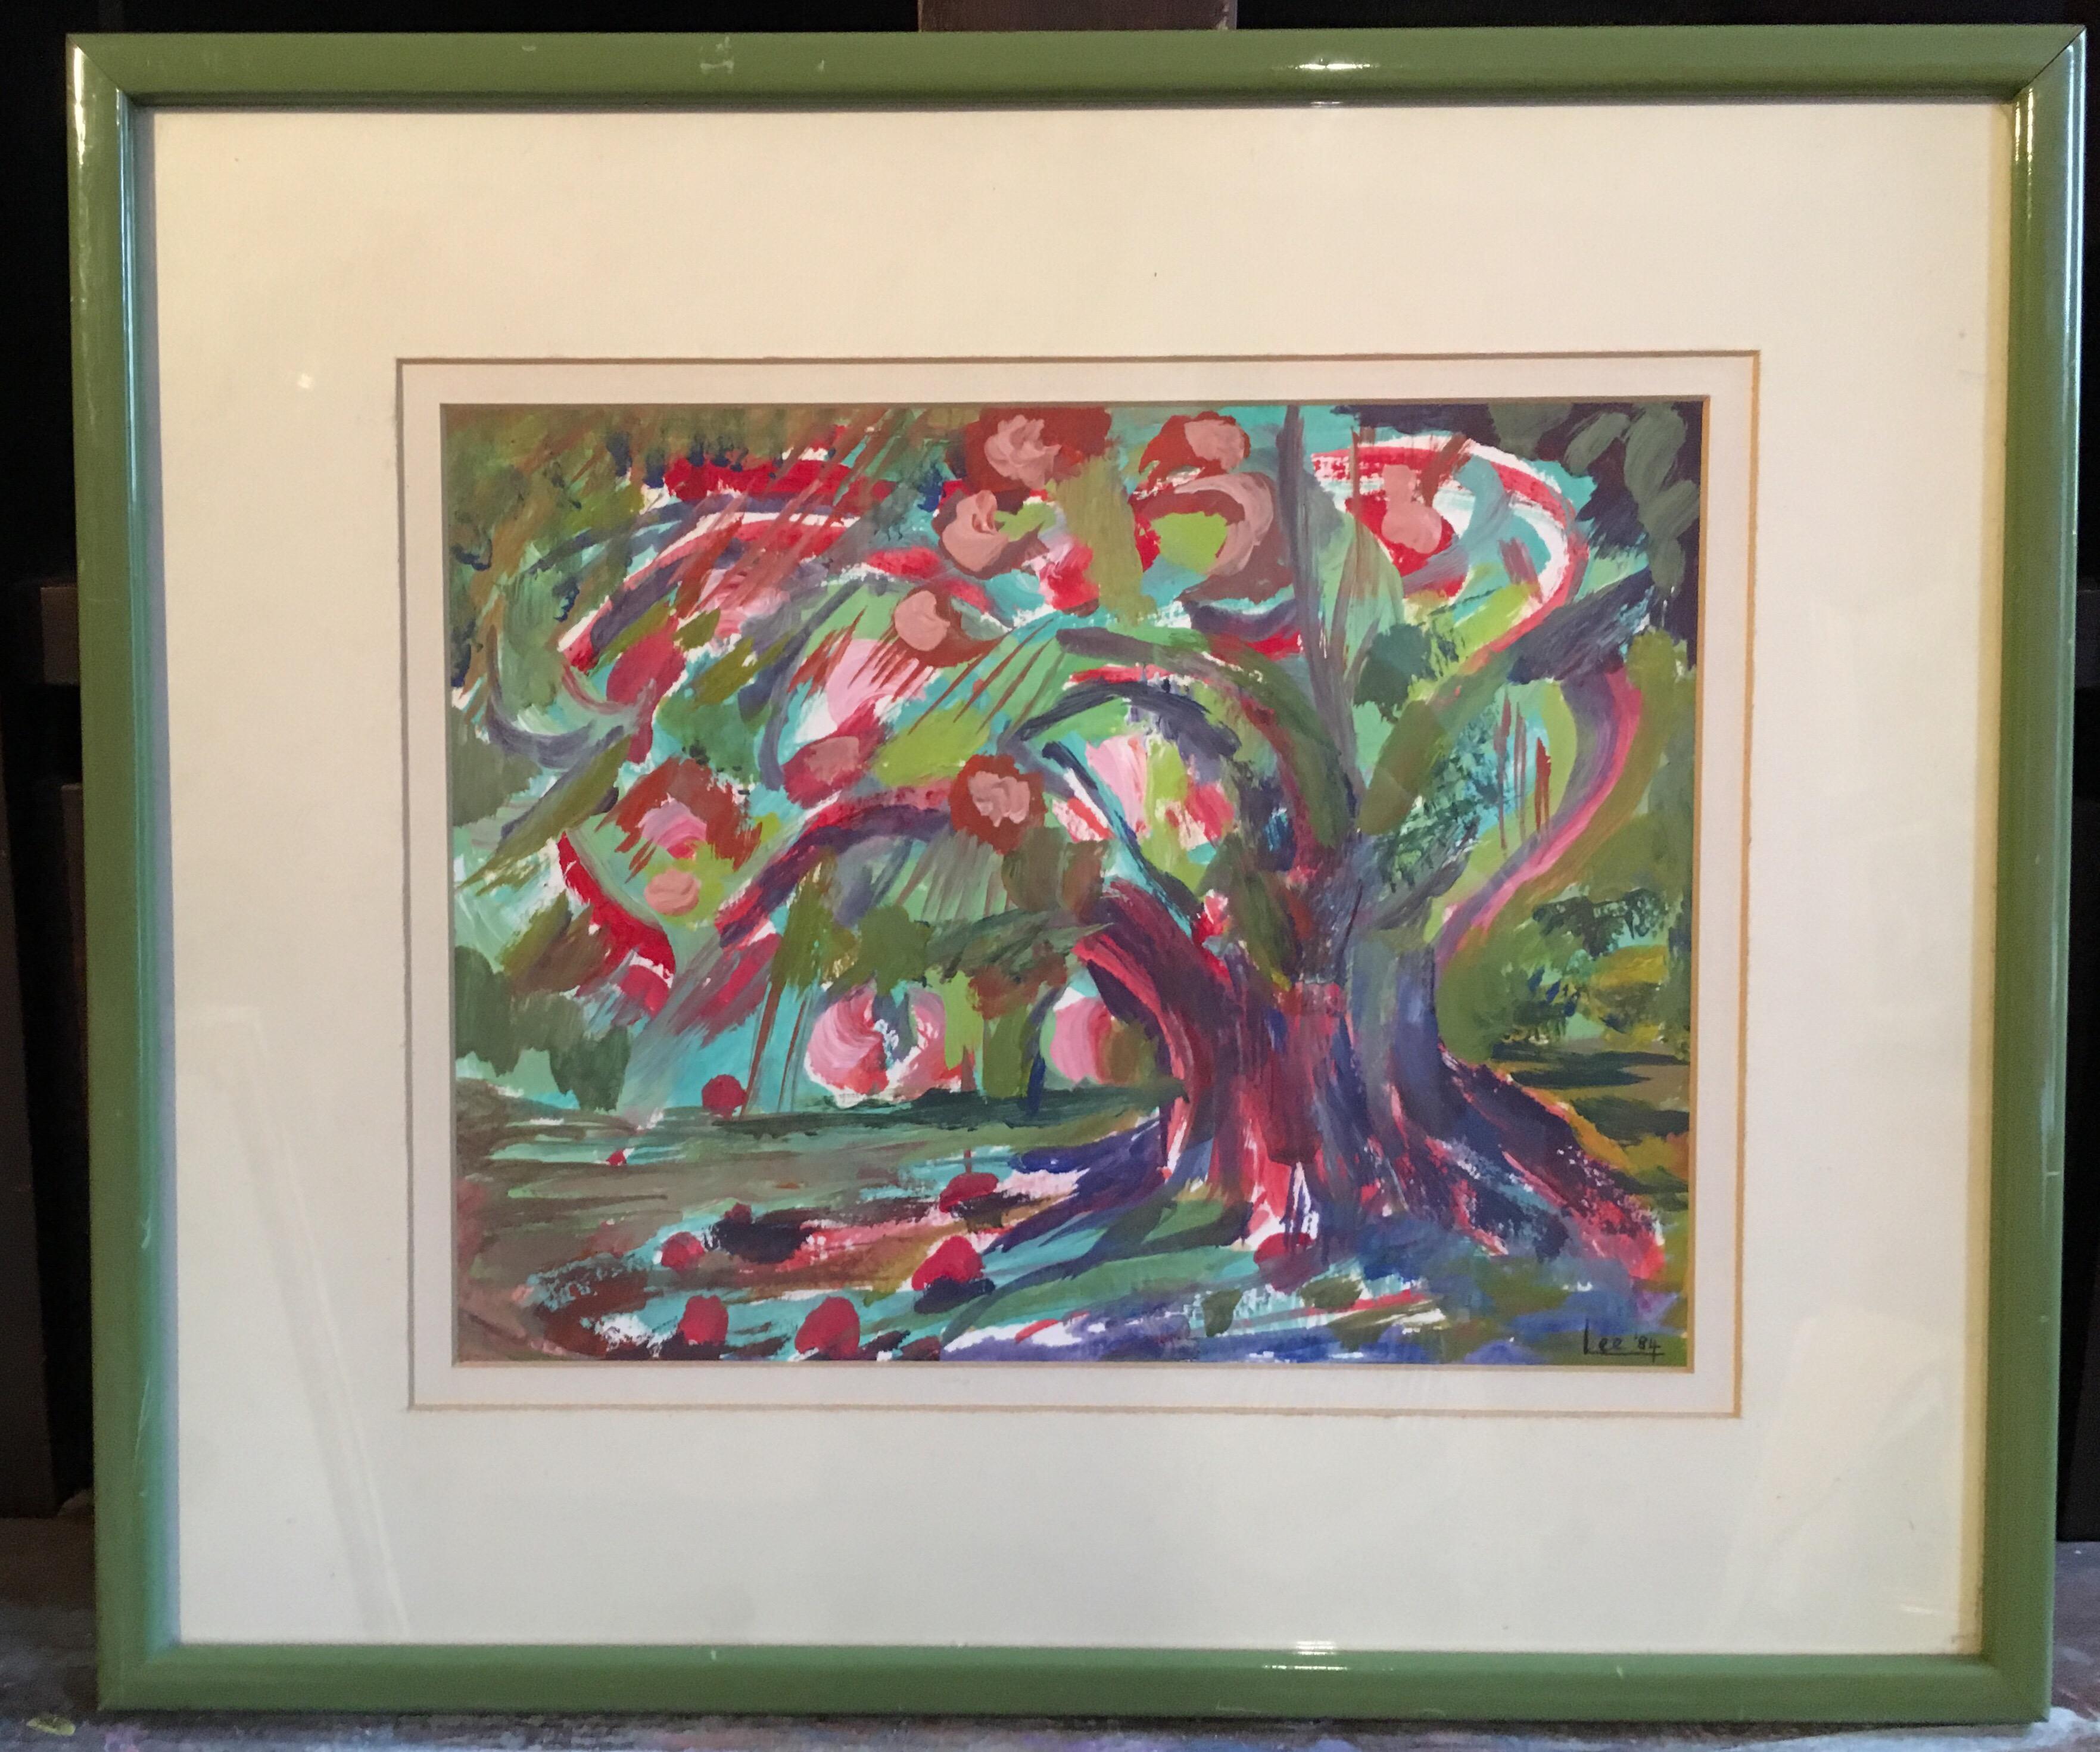 Multicoloured Abstract Oil Painting, Signed and Dated
By British artist Gillian Lee, late 20th Century
Signed and dated '84 by the artist on the lower right hand corner
Oil painting on board, framed
Framed size: 15 x 18 inches

Fabulous abstract of